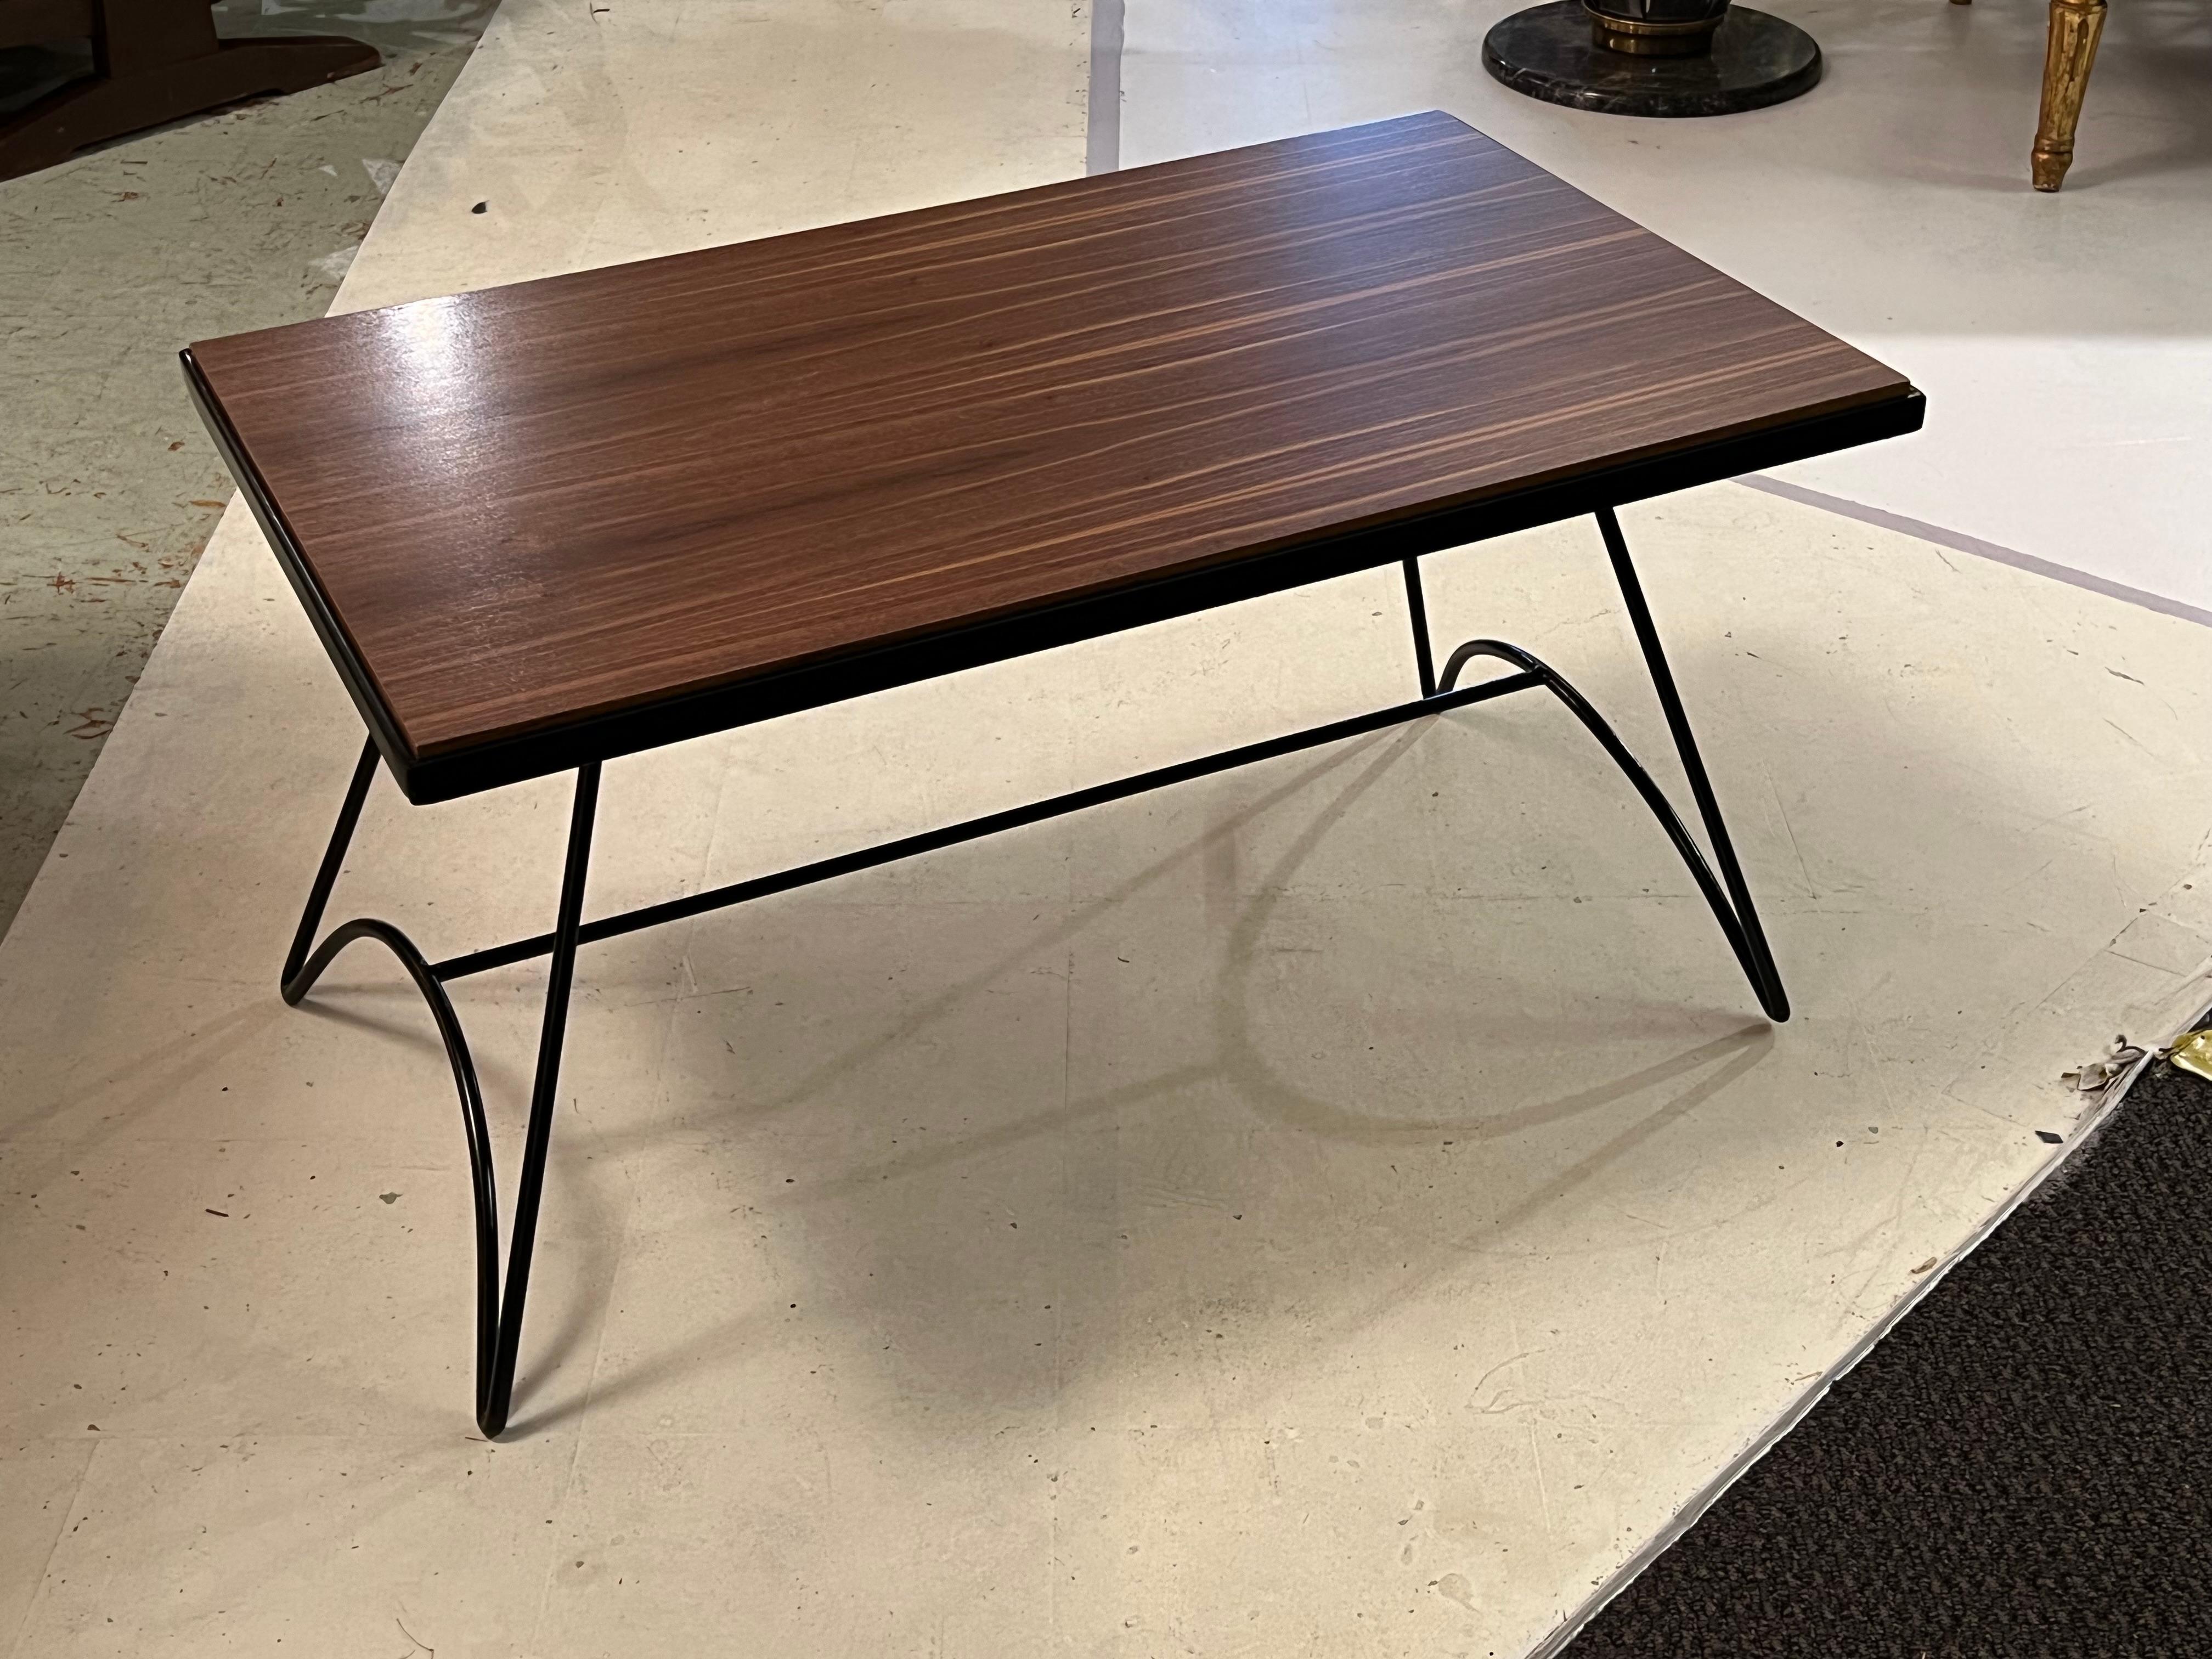 Walnut top coffee table with metal legs by Jacques Hitier.
Jacques Hitier (28 March 1917 – 5 March 1999) was a French interior architect and designer “one of the most prominent figures of decorative art of the second half of the twentieth century”.